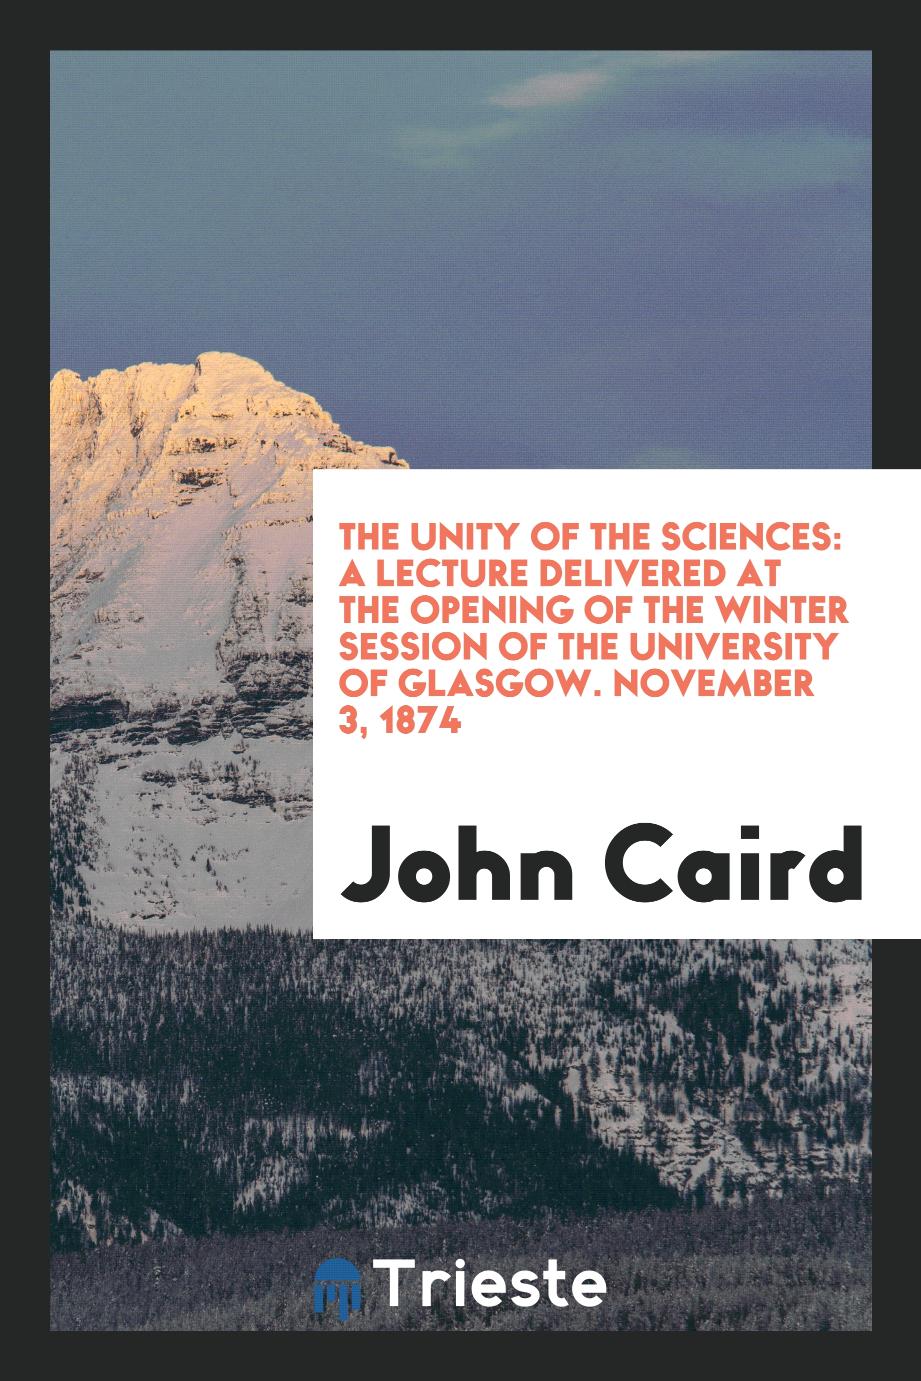 The unity of the sciences: A lecture delivered at the opening of the winter session of the University of Glasgow. November 3, 1874